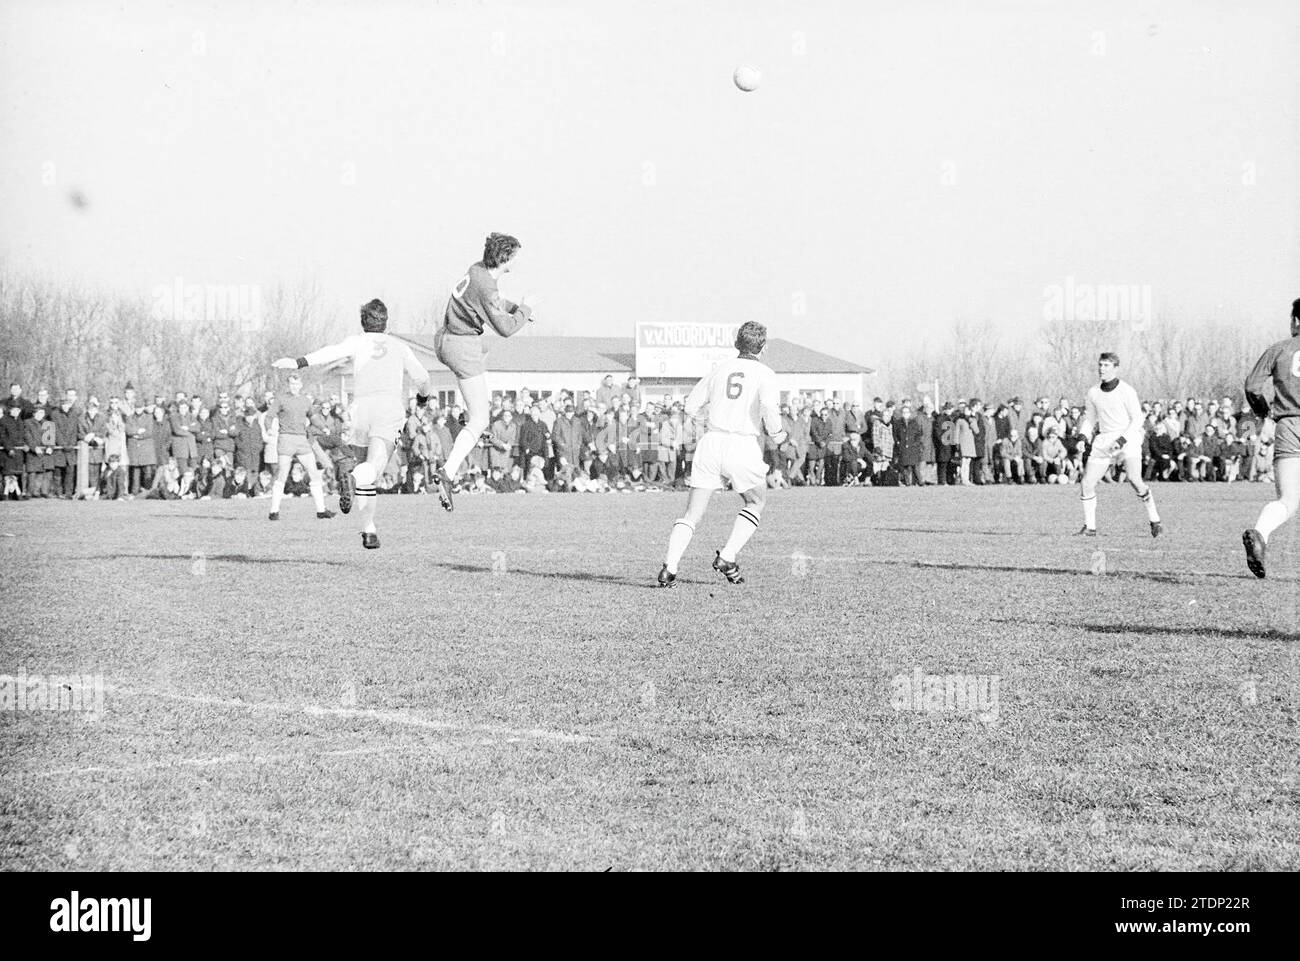 Noordwijk - Black and White, Football, 15-03-1970, Whizgle News from the Past, Tailored for the Future. Explore historical narratives, Dutch The Netherlands agency image with a modern perspective, bridging the gap between yesterday's events and tomorrow's insights. A timeless journey shaping the stories that shape our future Stock Photo